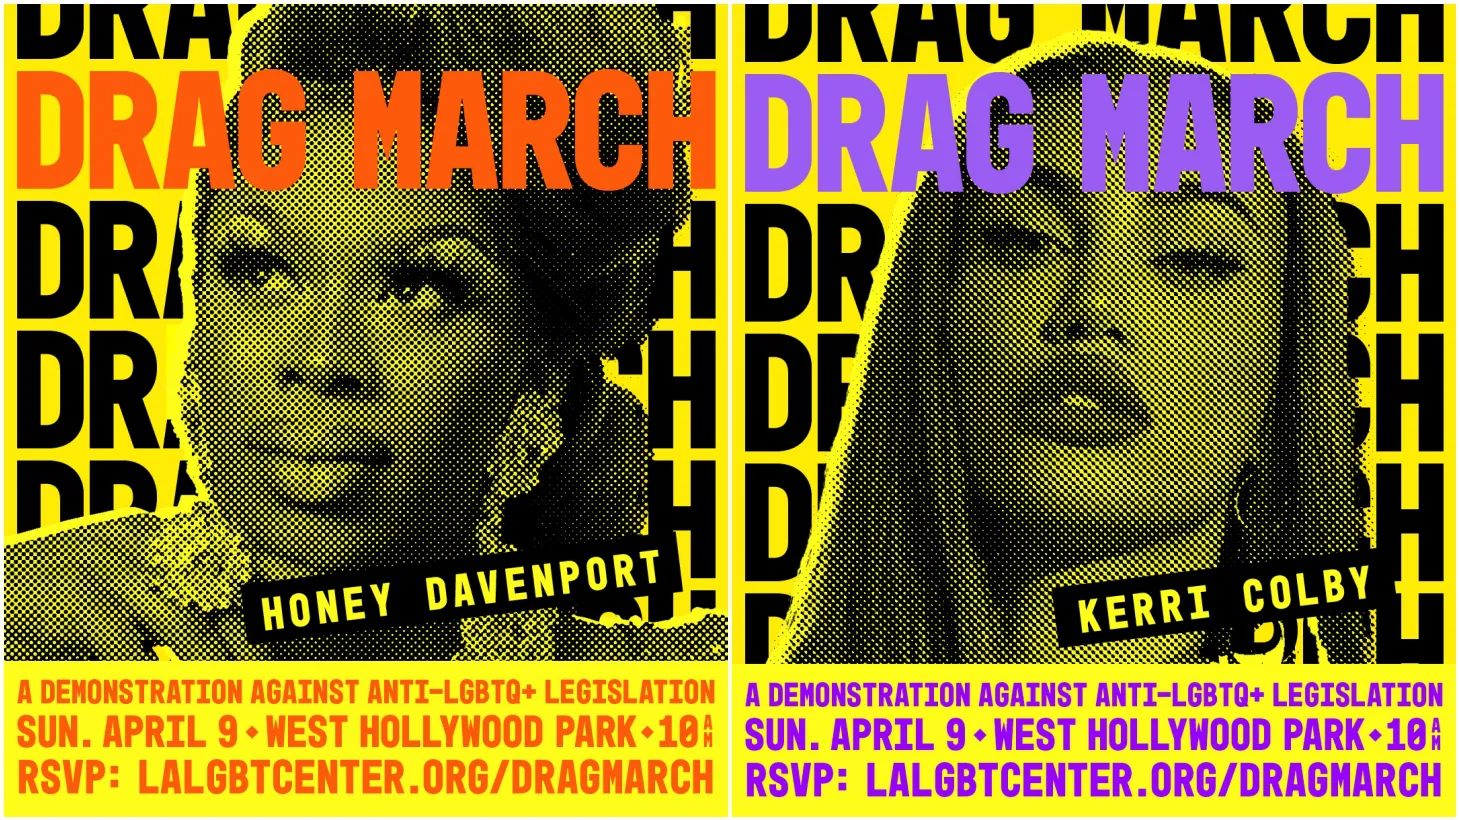 Put ONE and TWO side-by-side: Drag artists Honey Davenport and Kerri Colby, both former competitors on the show “RuPaul’s Drag Race,” will perform at Drag March LA on Easter Sunday in protest of anti-LGBTQ legislation nationwide.